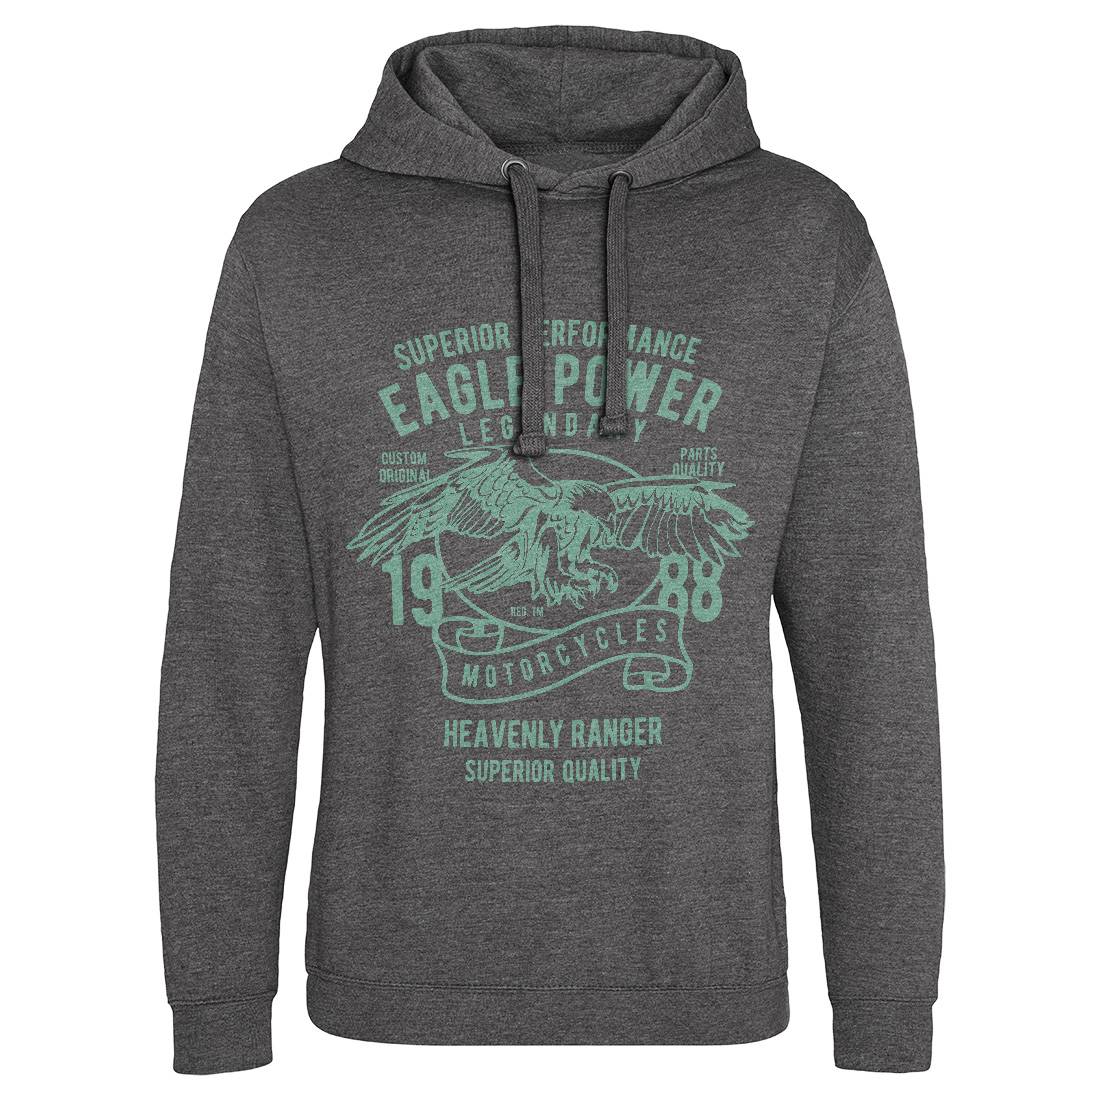 Eagle Power Mens Hoodie Without Pocket Motorcycles B205